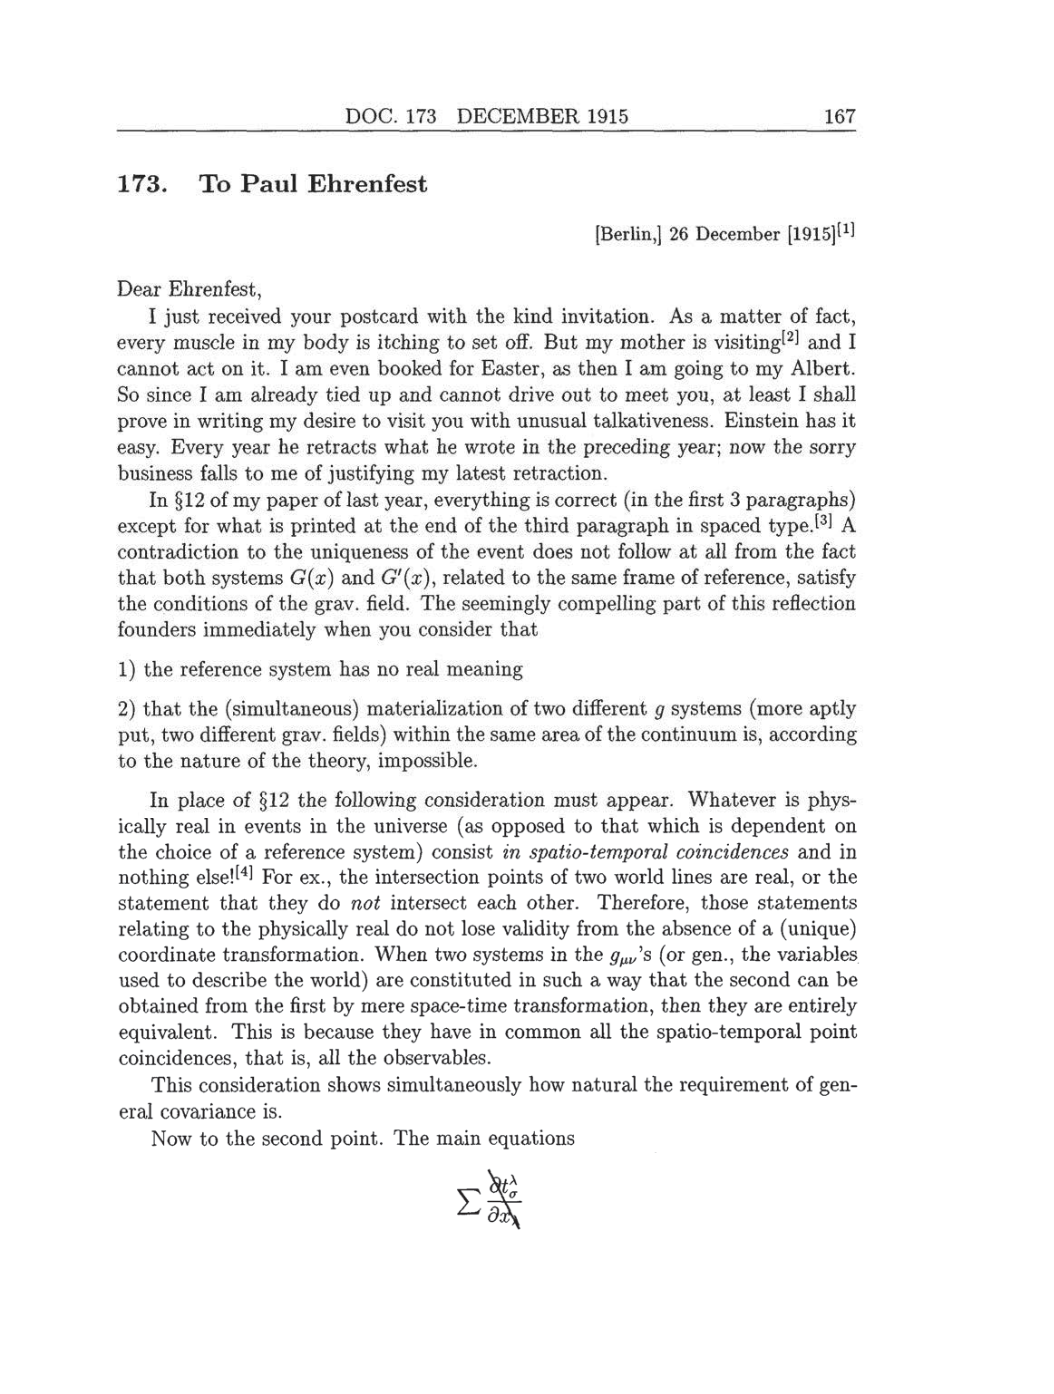 Volume 8: The Berlin Years: Correspondence, 1914-1918 (English translation supplement) page 167